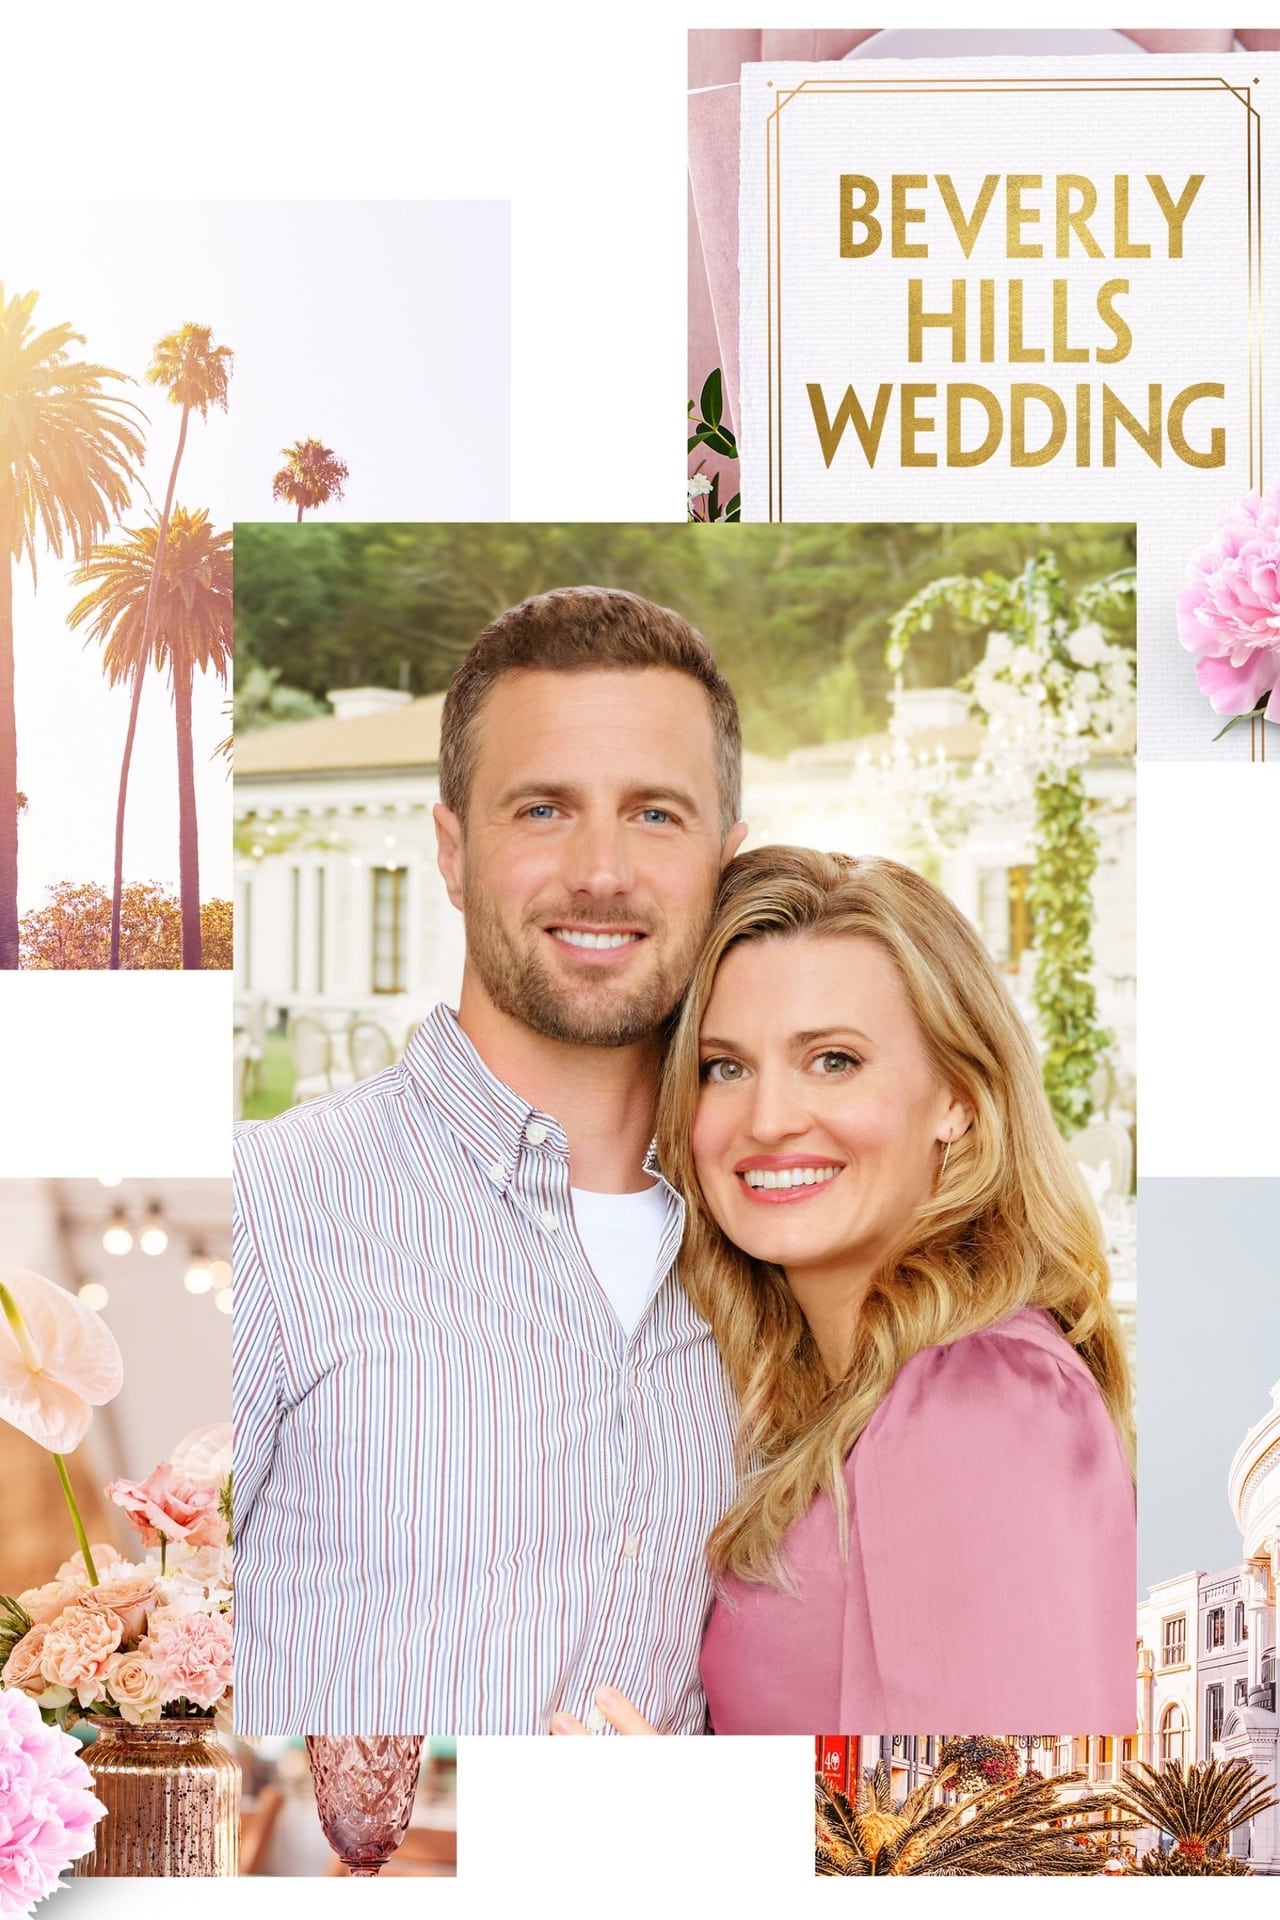 Beverly Hills Wedding Posters.